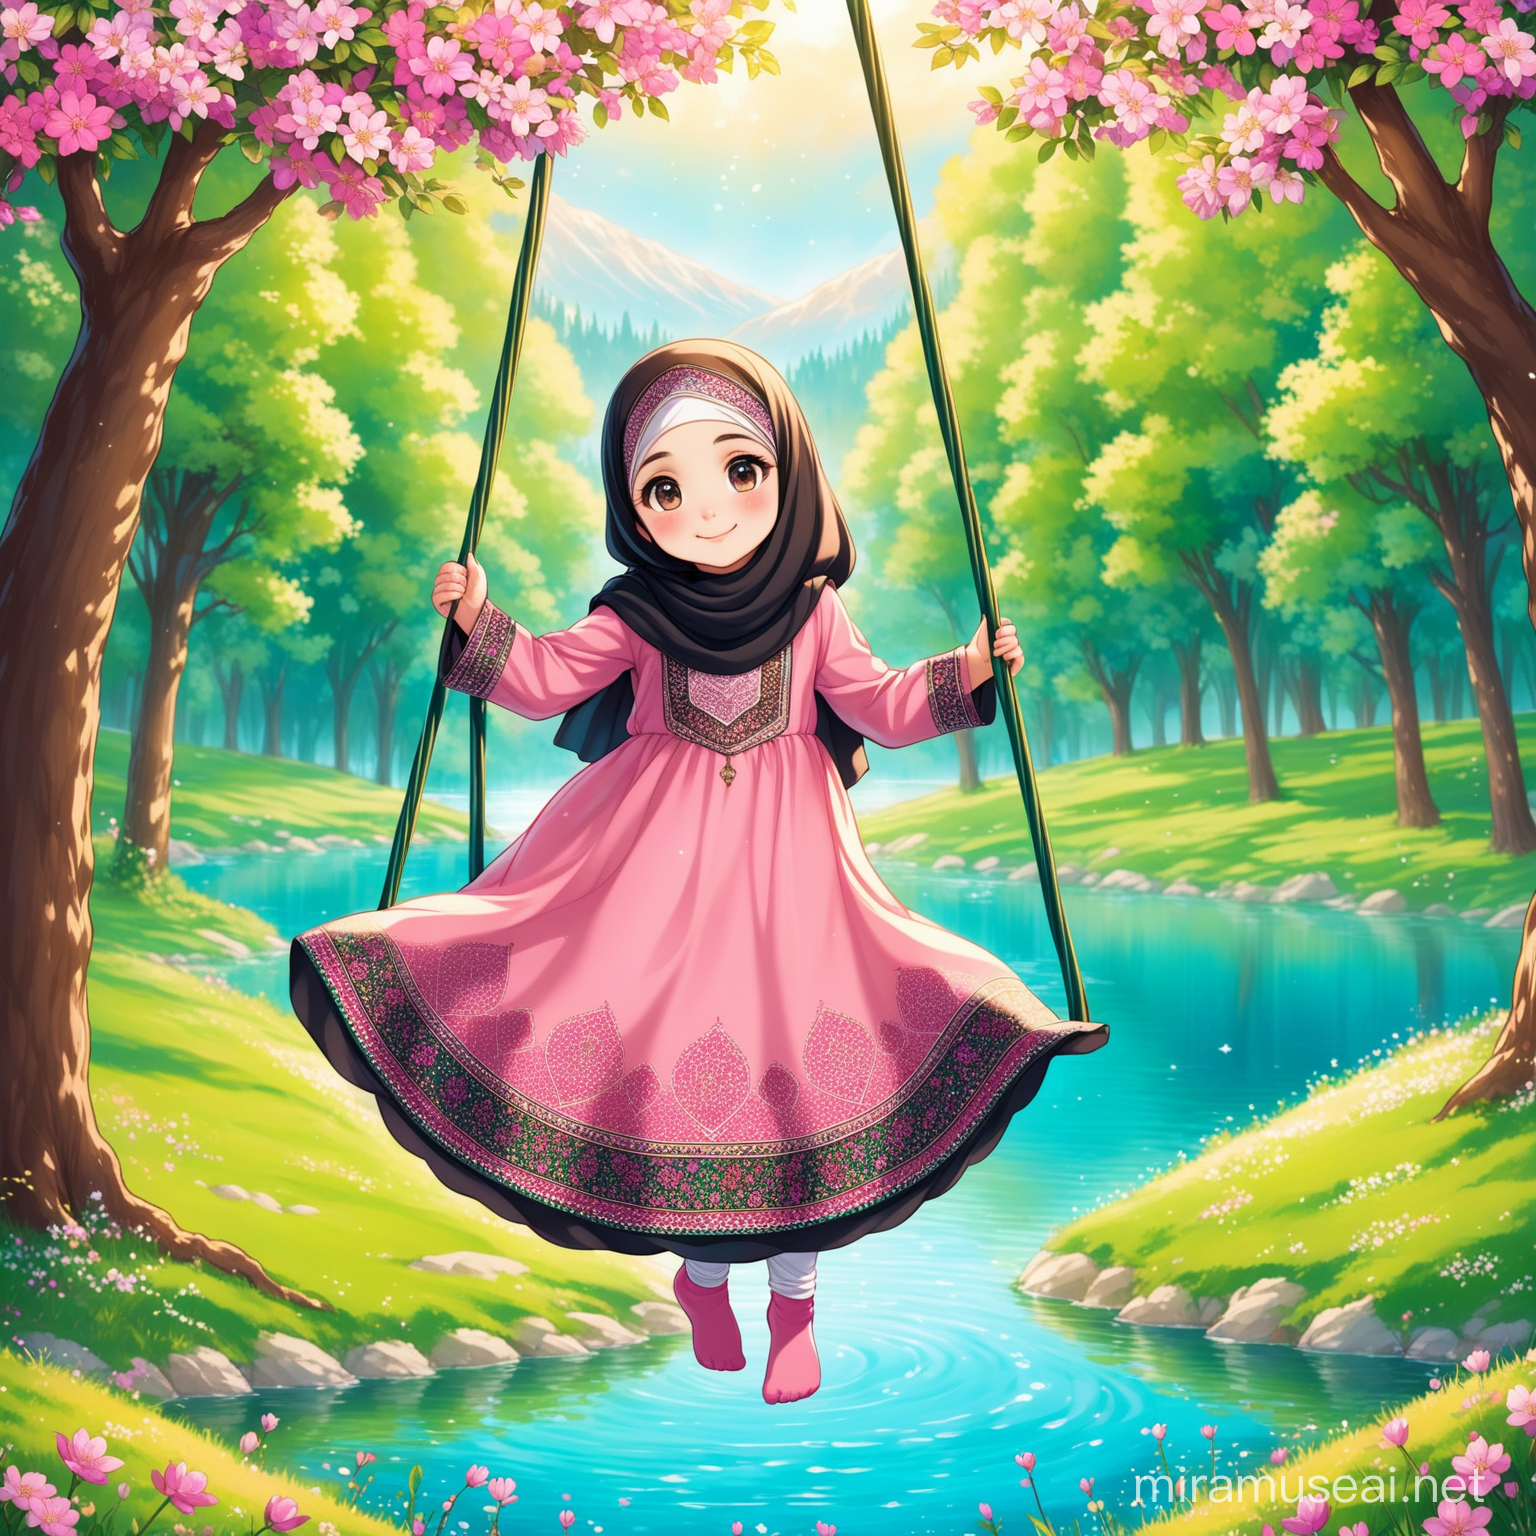 Persian little girl named Fatemeh.

Fatemeh is 7 years old Muslim, full height, no hair out of veil(Hijab), smaller eyes, bigger nose, white skin, cute, smiling, wearing socks, clothes with a lot of Persian designs.

Fatemeh is swinging.

Atmosphere forest, grass, pink flowers, spring, lake.